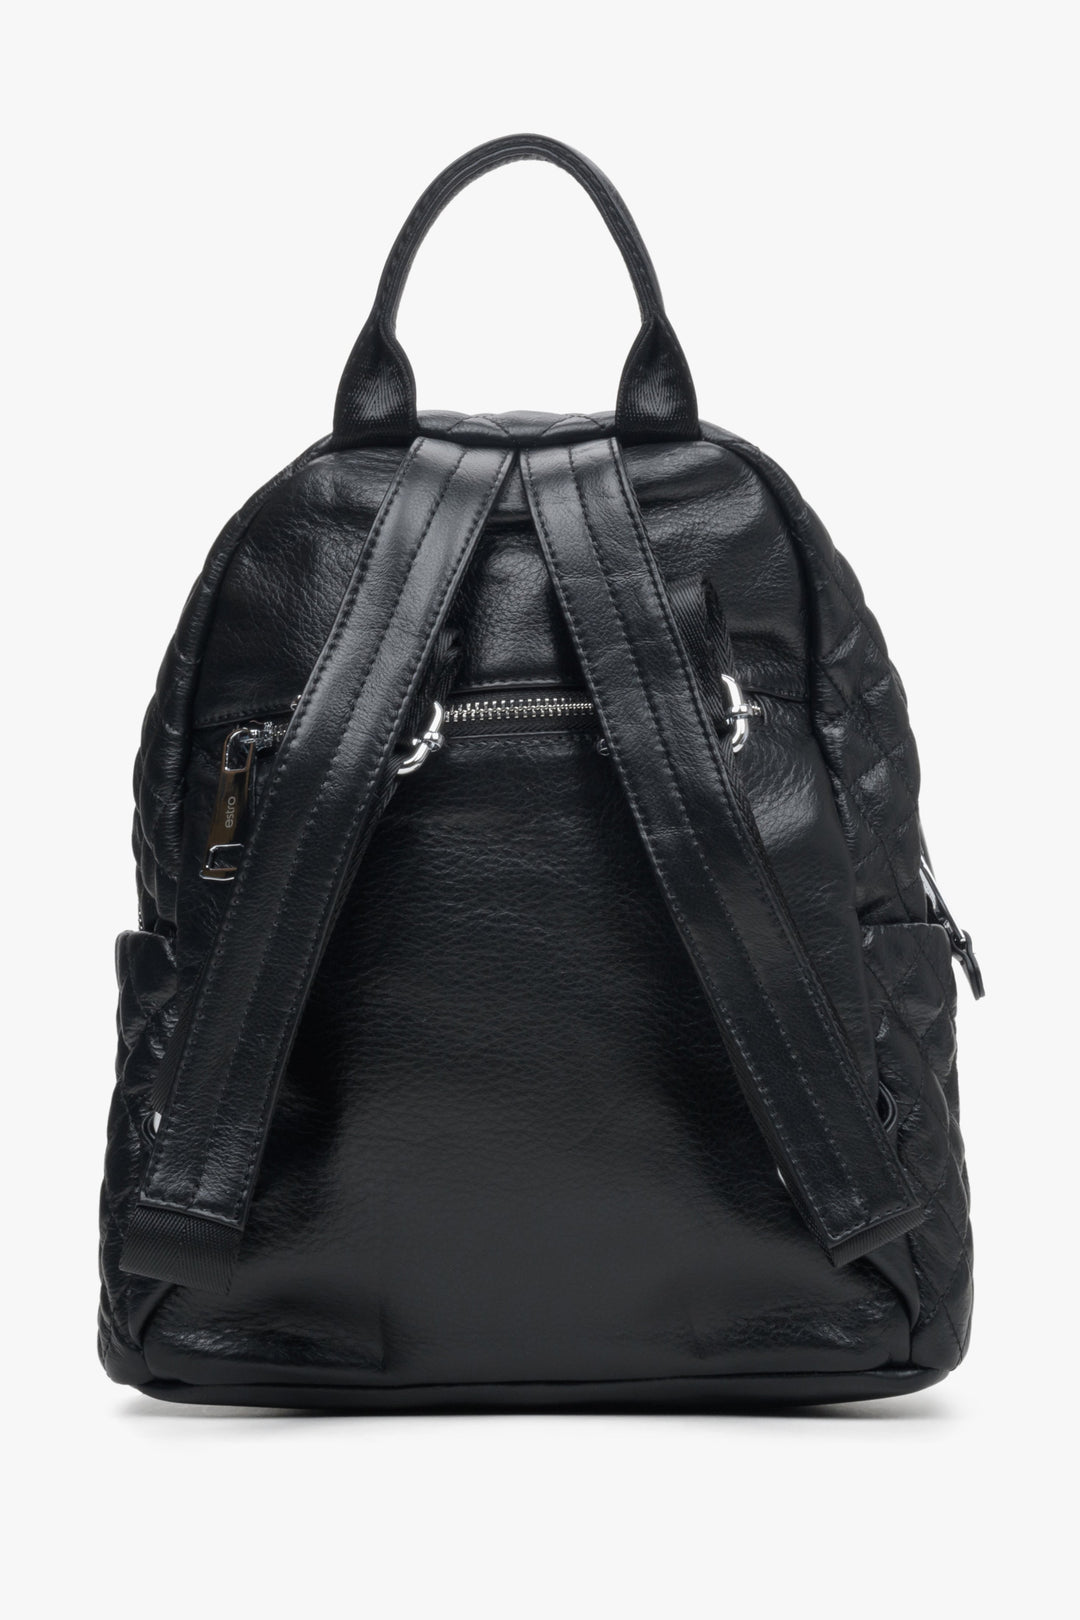 Women's black urban backpack by Estro - close-up of the back.